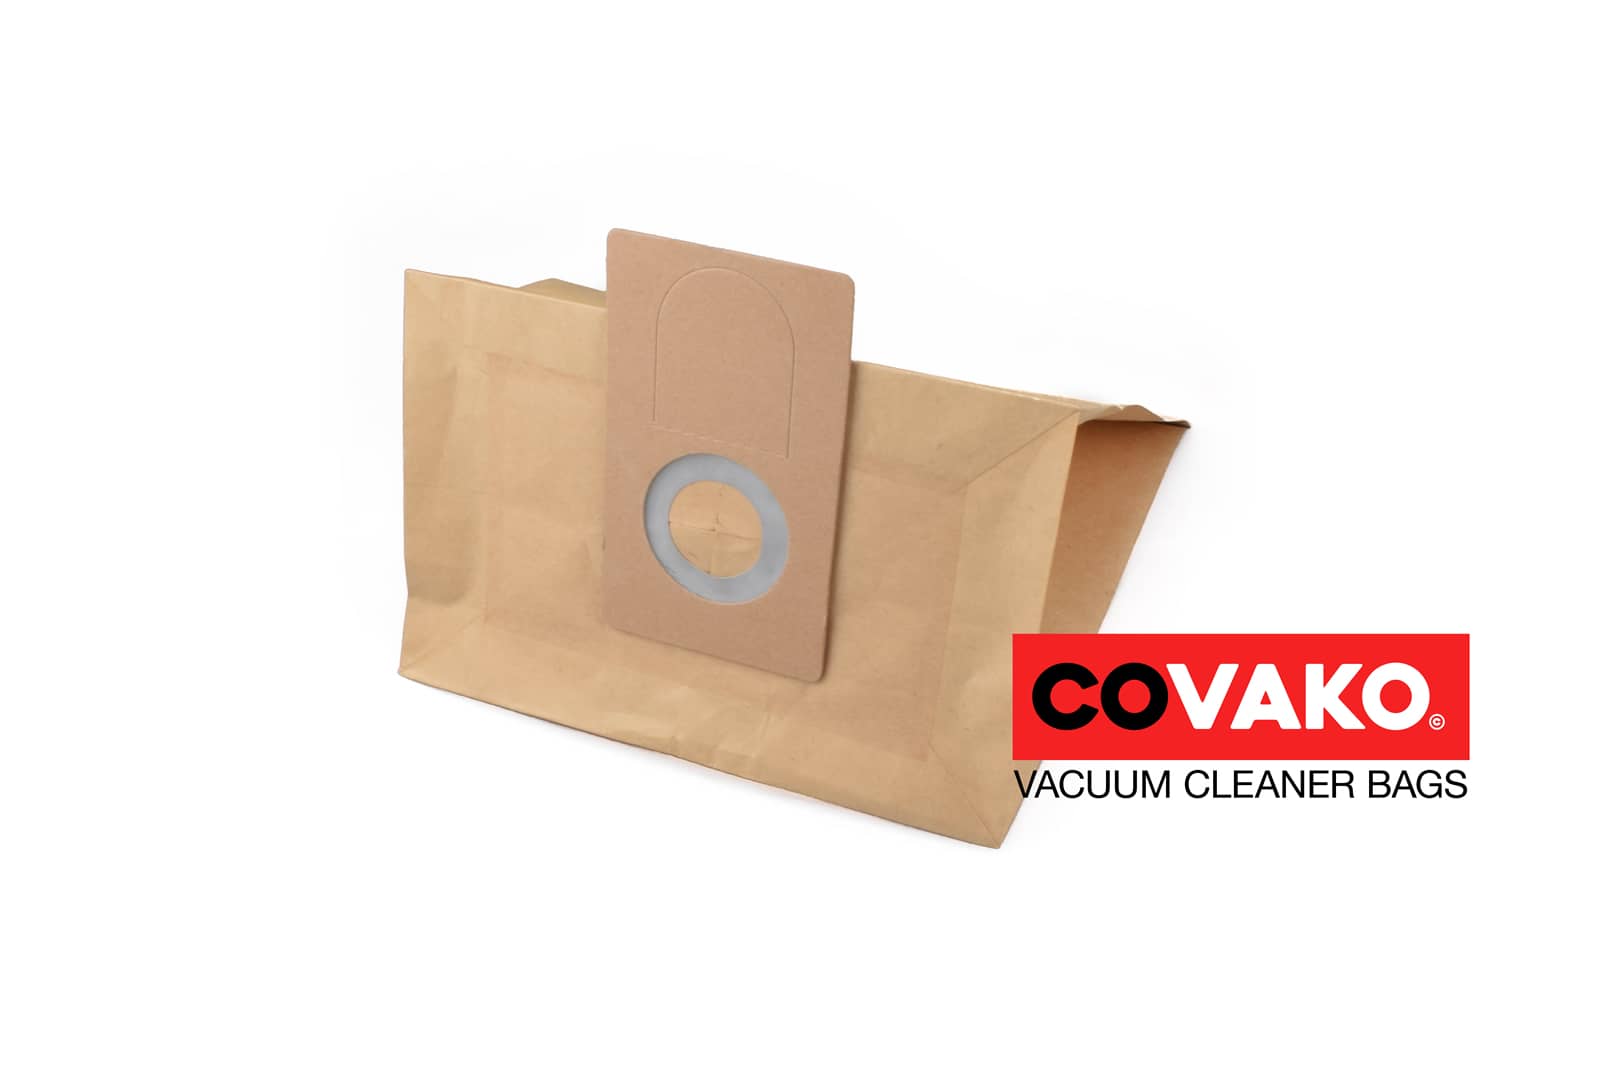 Oehme Otto S11 / Paper - Oehme Otto vacuum cleaner bags